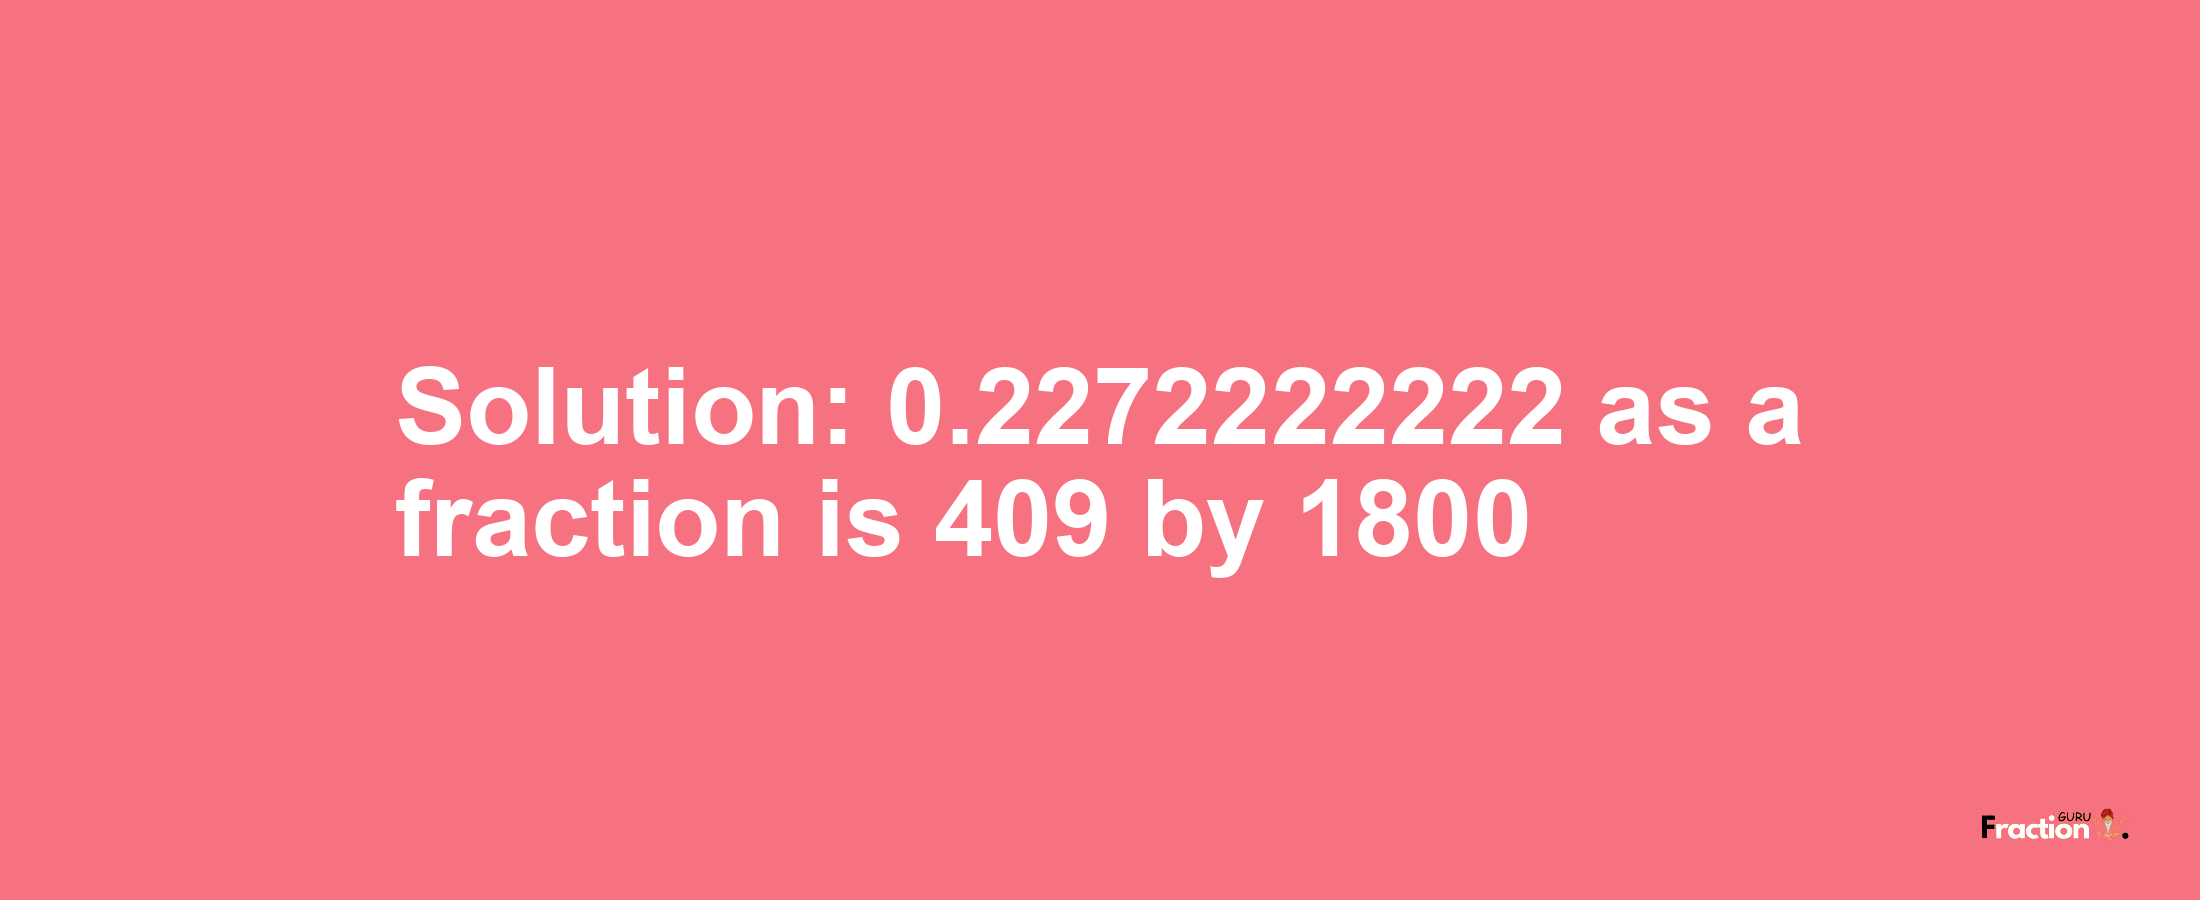 Solution:0.2272222222 as a fraction is 409/1800